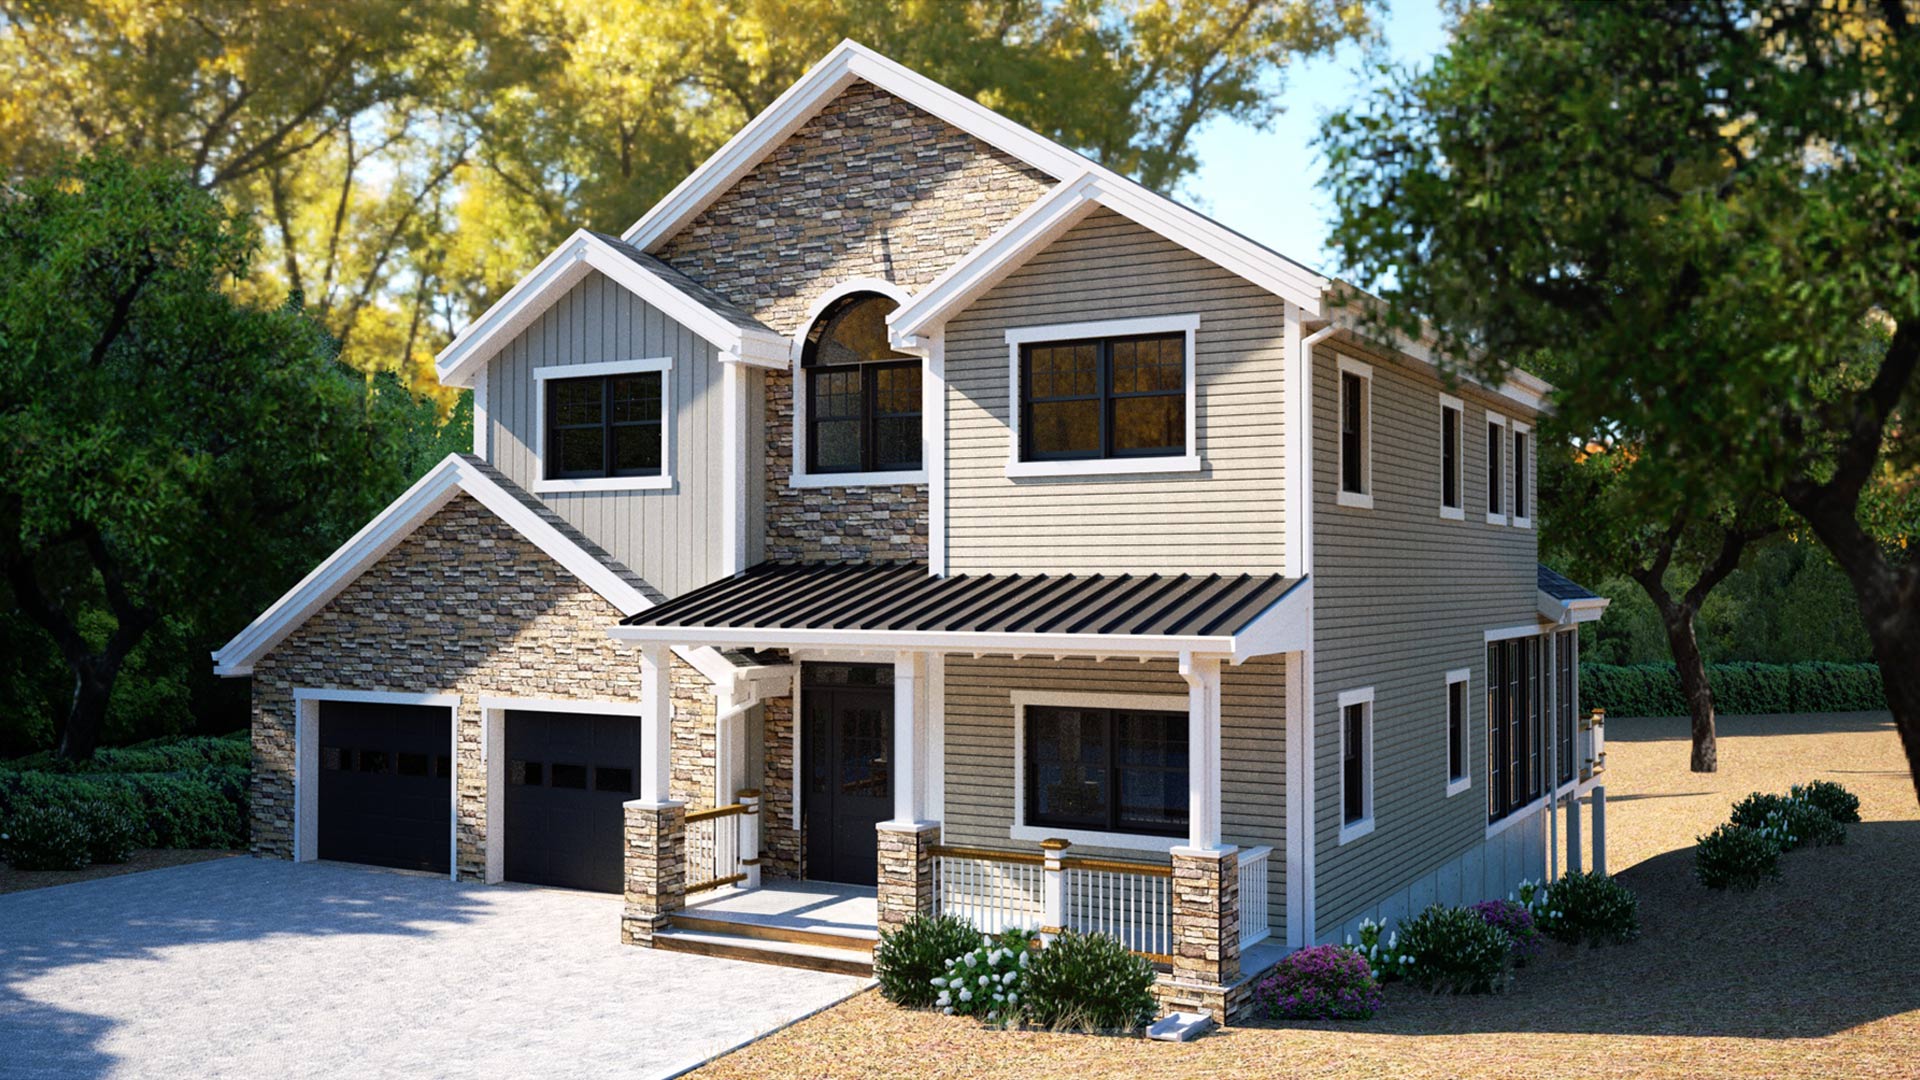 Exterior rendering of a Craftman style House in Simsbury, Connecticut